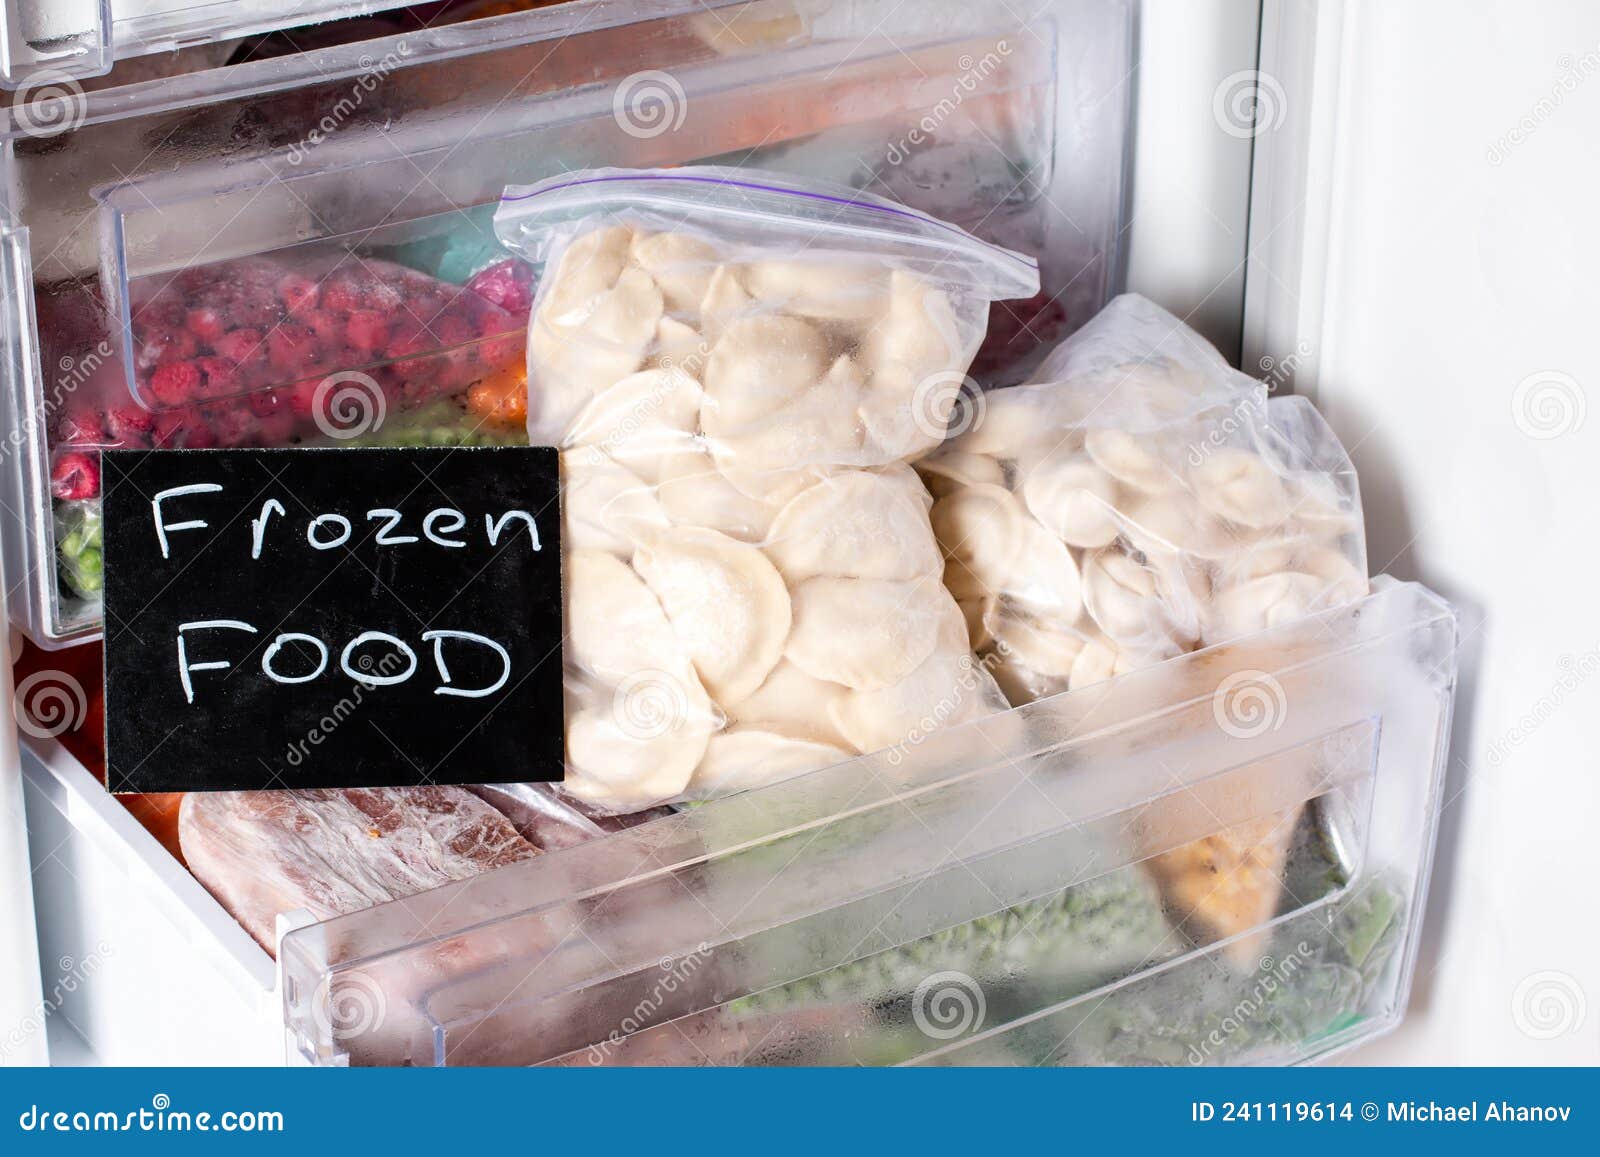 Premium Photo  Frozen food, vegetables and meat in the